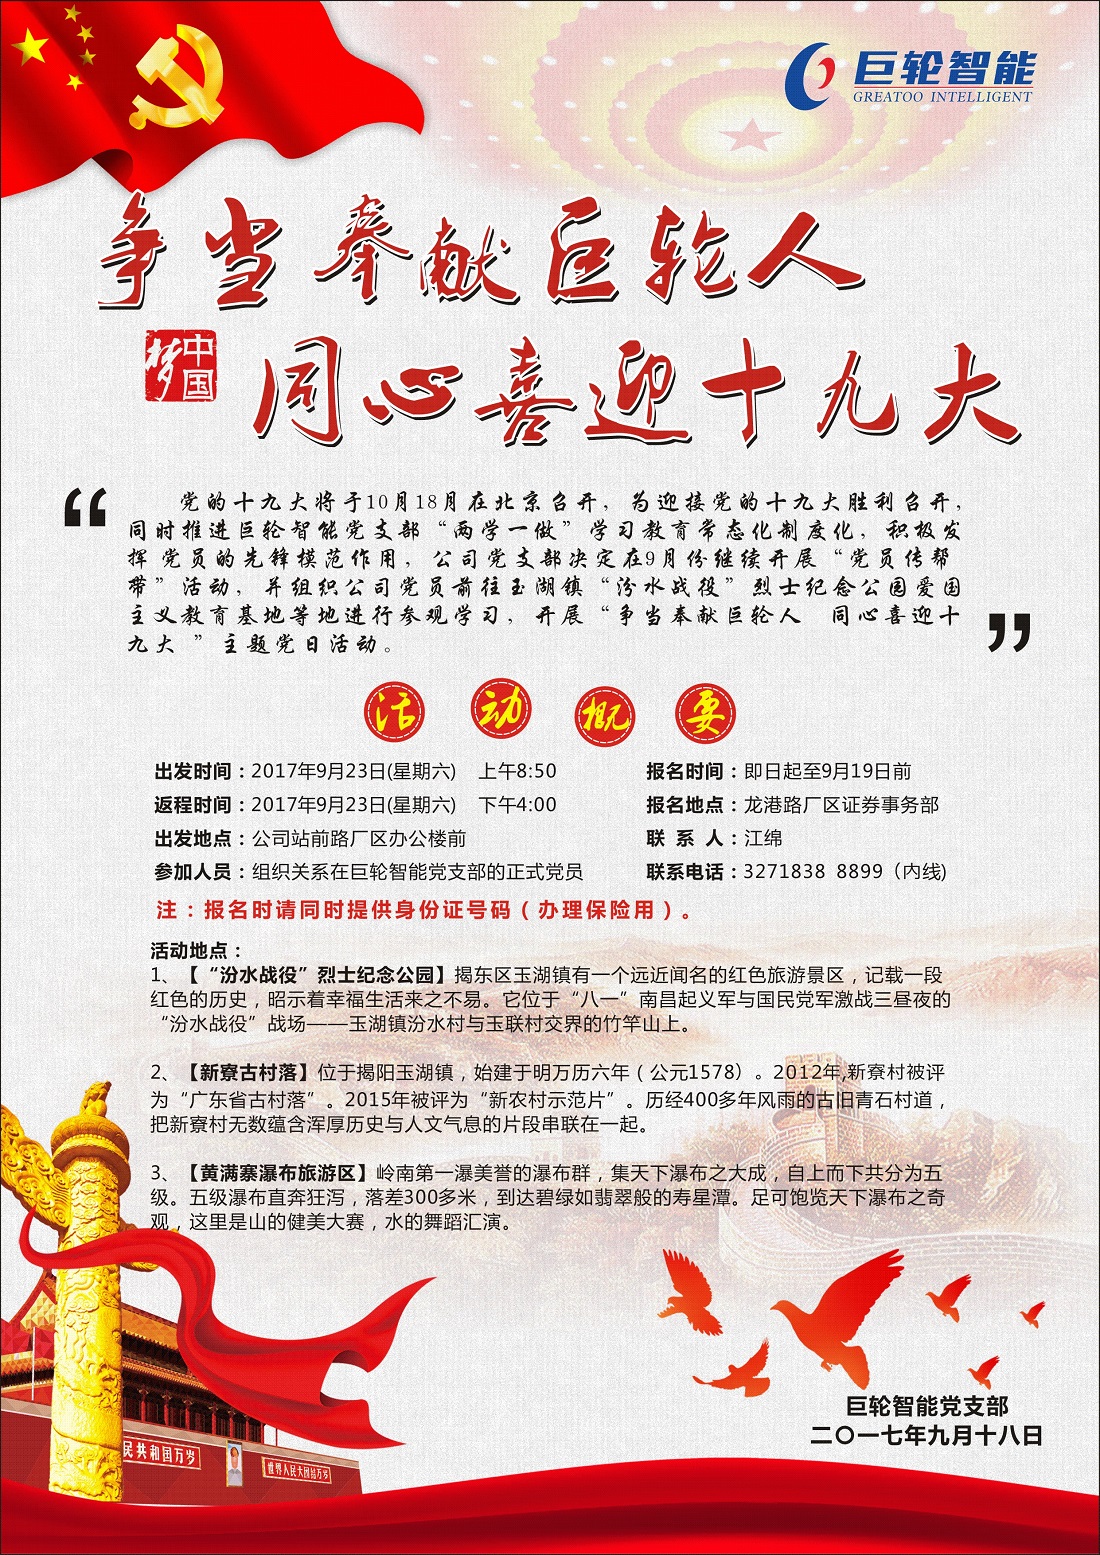 Party Branch of Greatoo Carry Out a Series of Learning Activities to Prepare for the 19th CPC National Congress